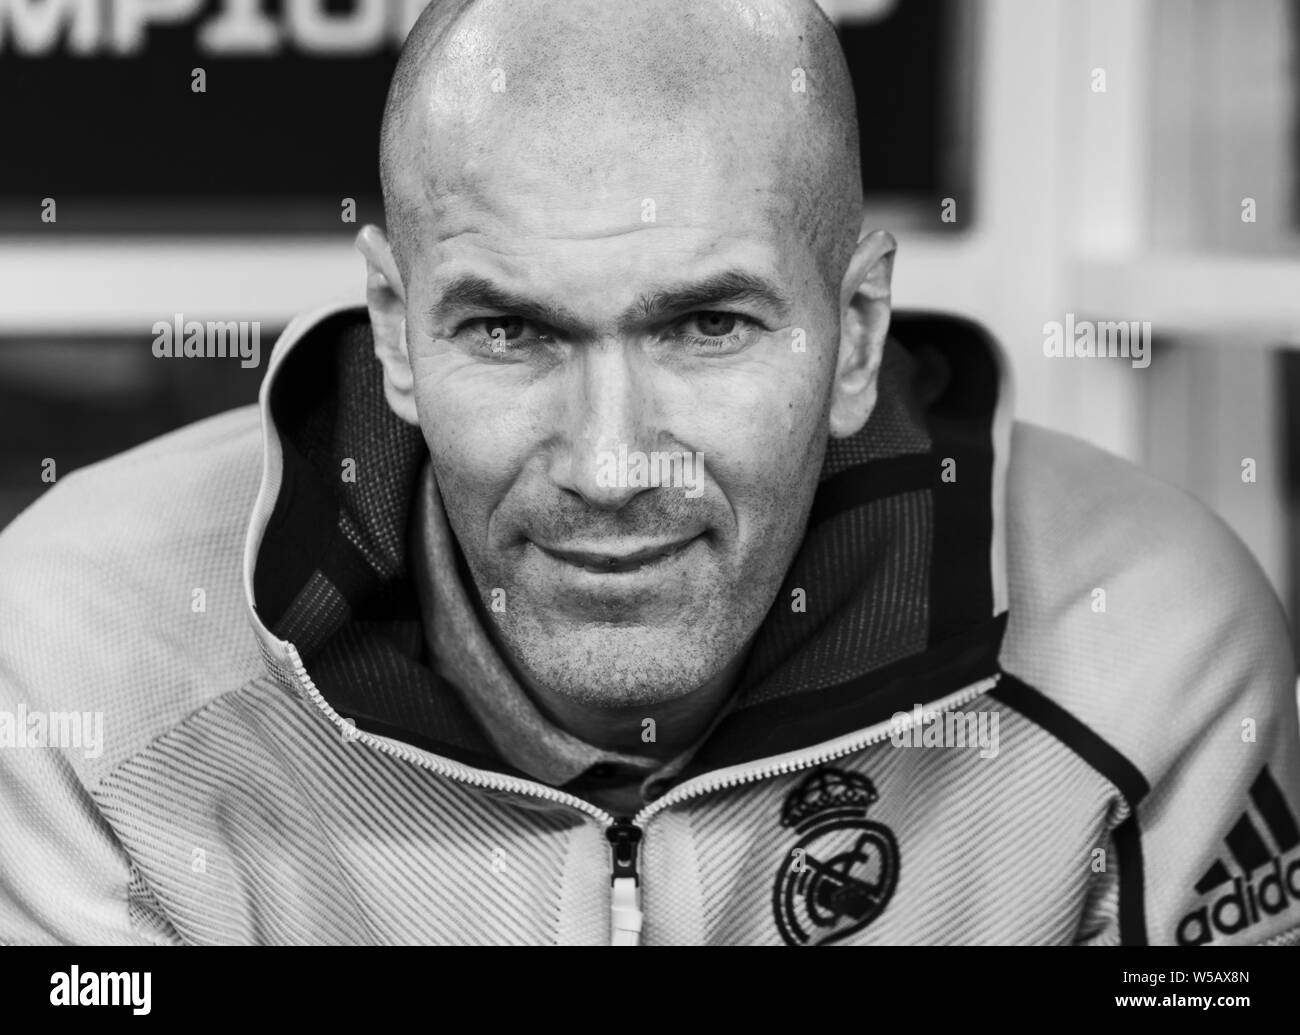 East Rutherford, NJ - July 26, 2019: Real Madrid head coach Zinedine Zidane shown during game against Atletico Madrid as part of ICC tournament at Metlife stadium Atletico won 7 - 3 Stock Photo